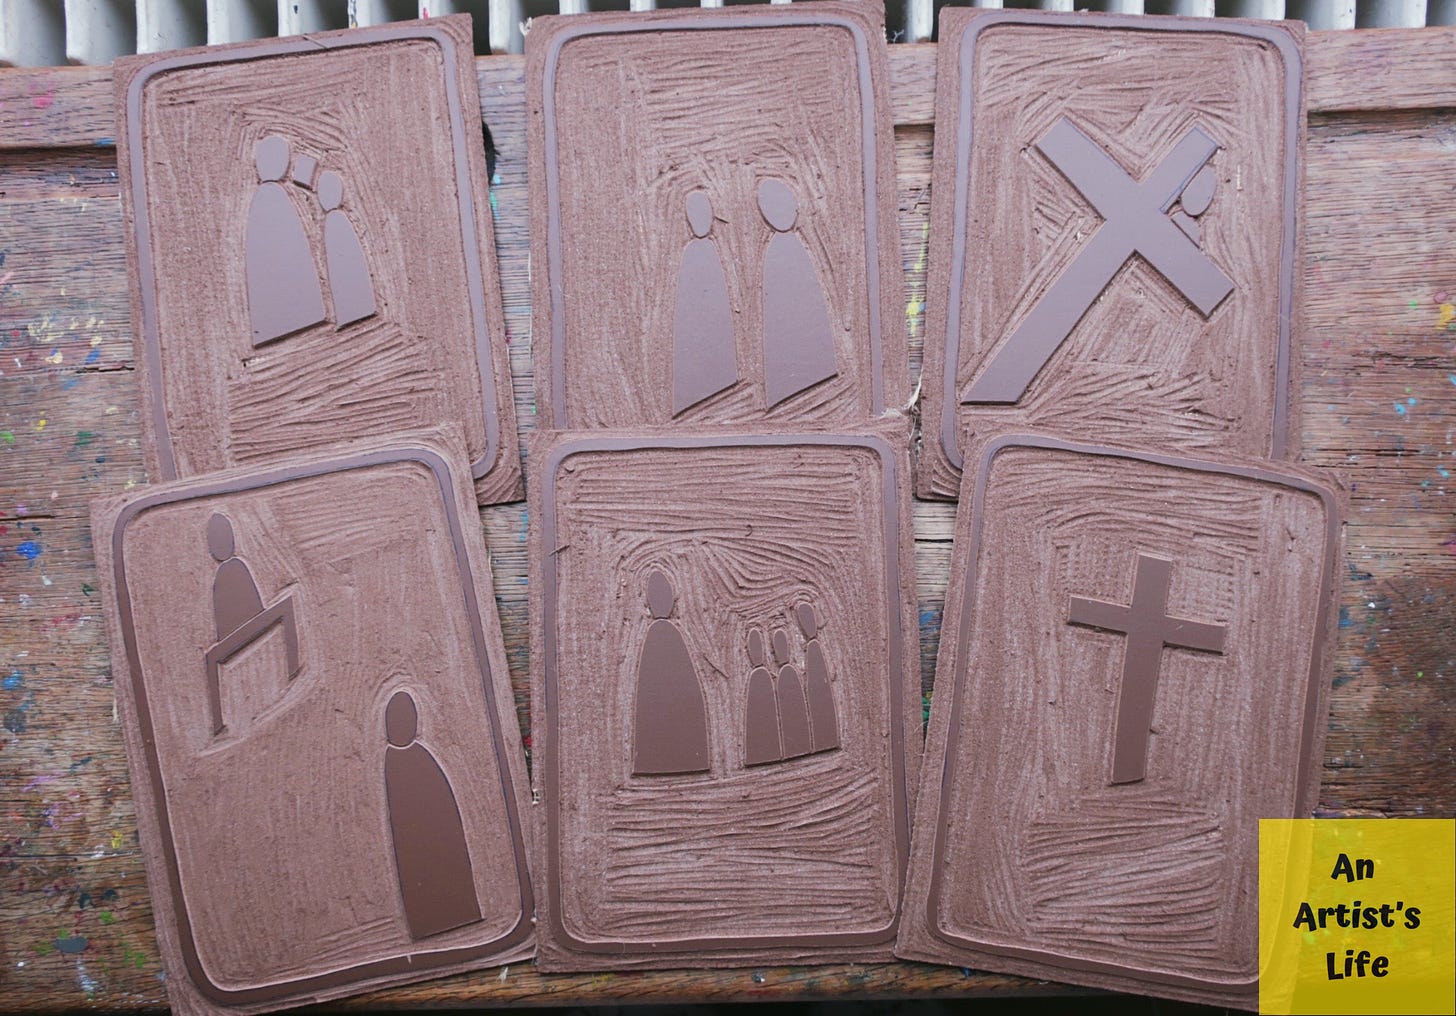 Linocut boards ready to be printed